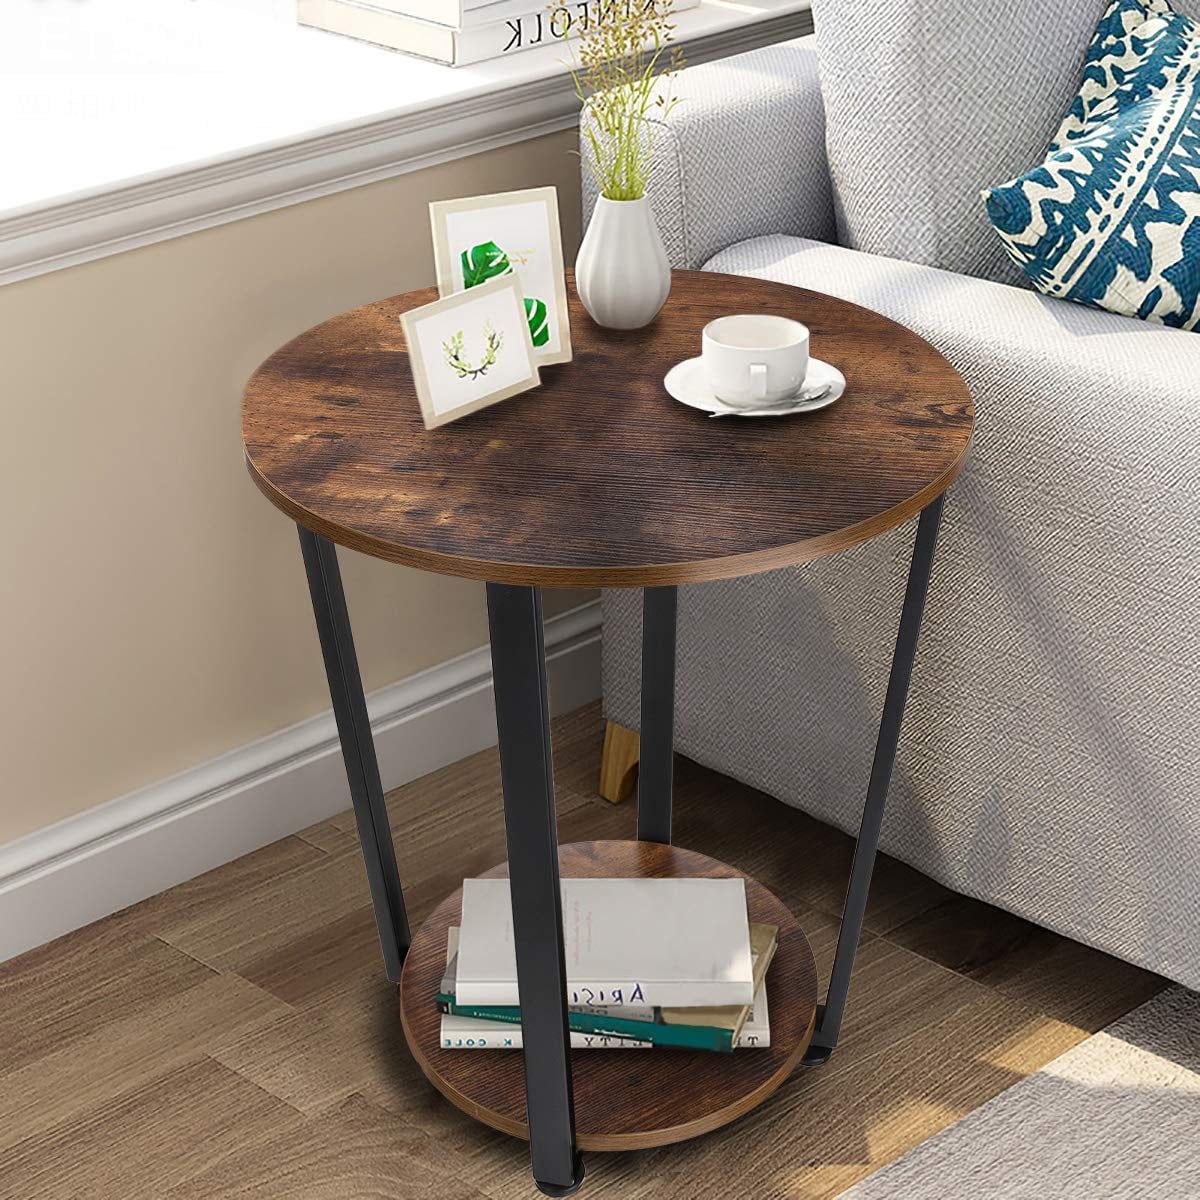 Zoepeng Small Round 2 Tier Wooden Side End Table For Small Spaces Throughout Wood Coffee Tables With 2 Tier Storage (View 16 of 20)